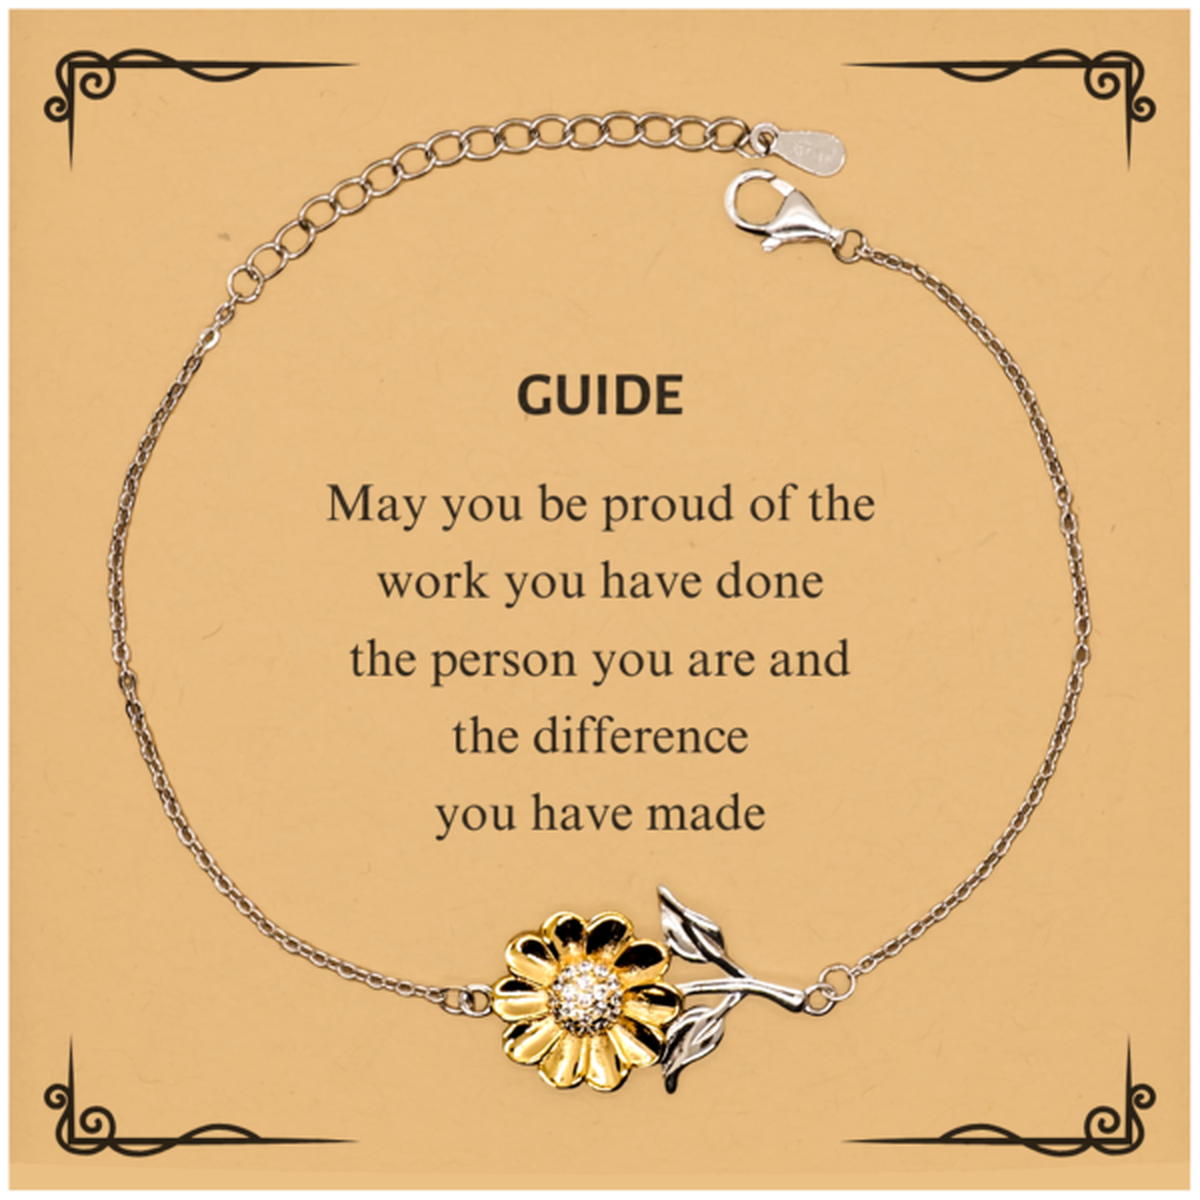 Guide May you be proud of the work you have done, Retirement Guide Sunflower Bracelet for Colleague Appreciation Gifts Amazing for Guide